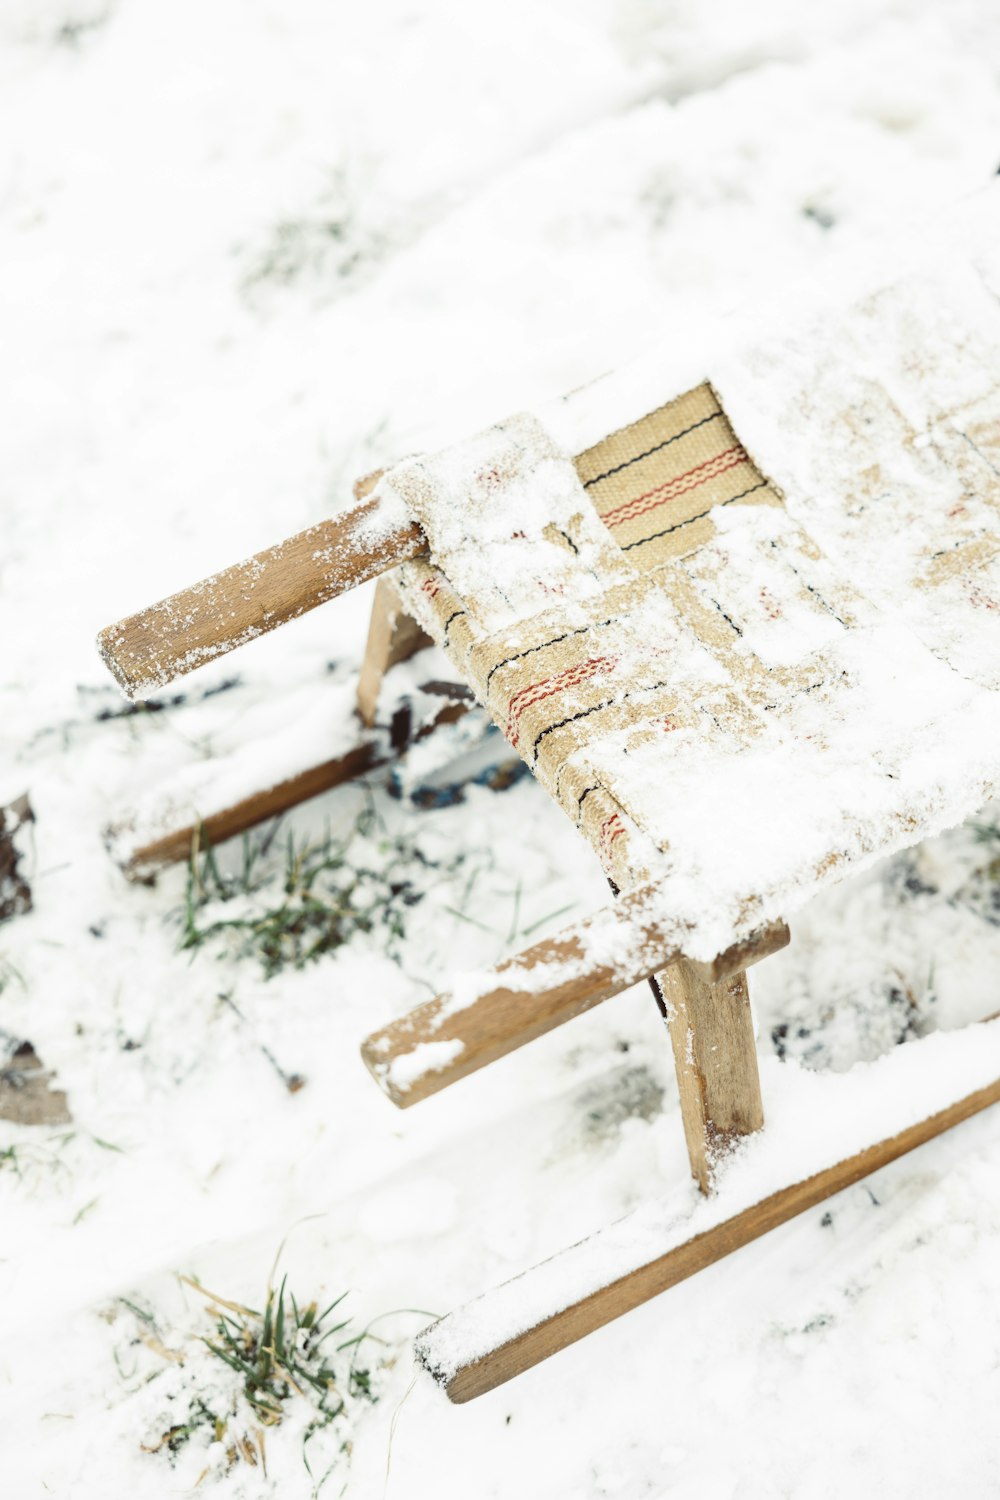 a wooden chair sitting in the snow covered ground